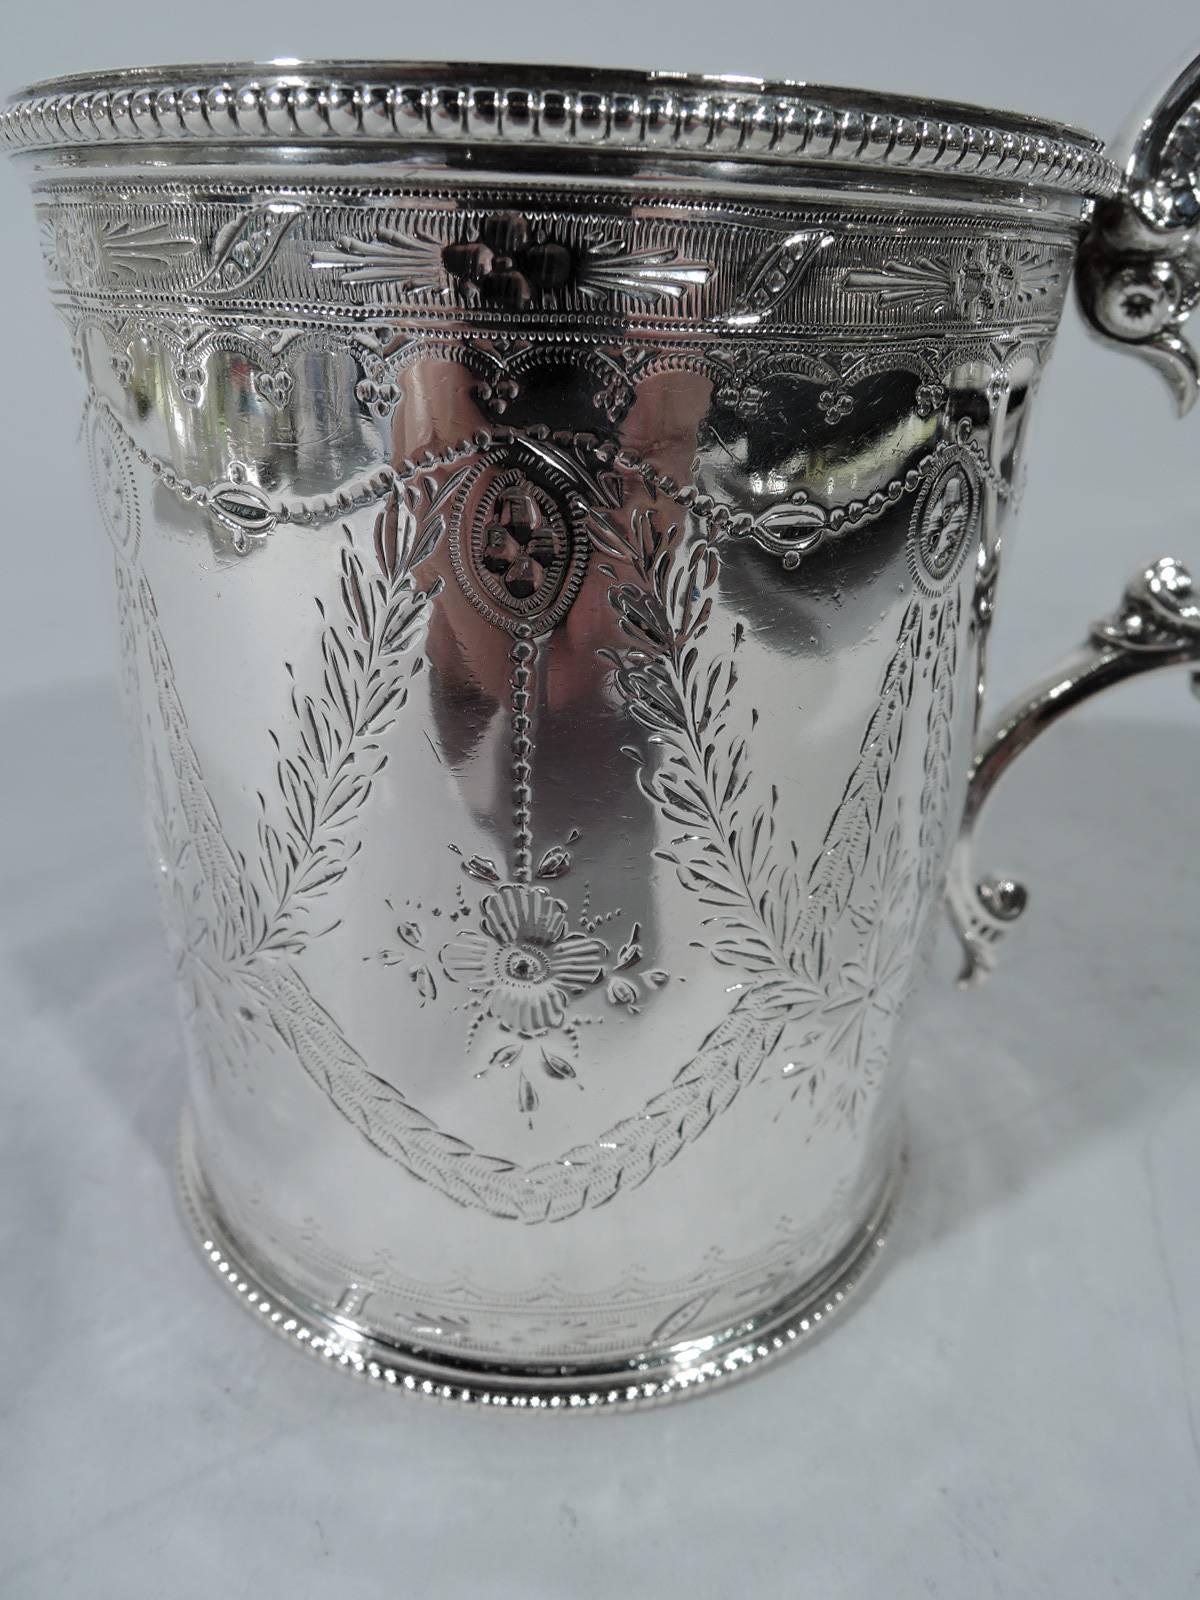 Victorian sterling silver baby cup. Made by Martin, Hall & Co. Ltd in Sheffield in 1866. Straight sides and scroll-capped beaded double-scroll handle. Paterae with pendant flowers and crisscrossing garlands. Beaded rims. Pretty neoclassical